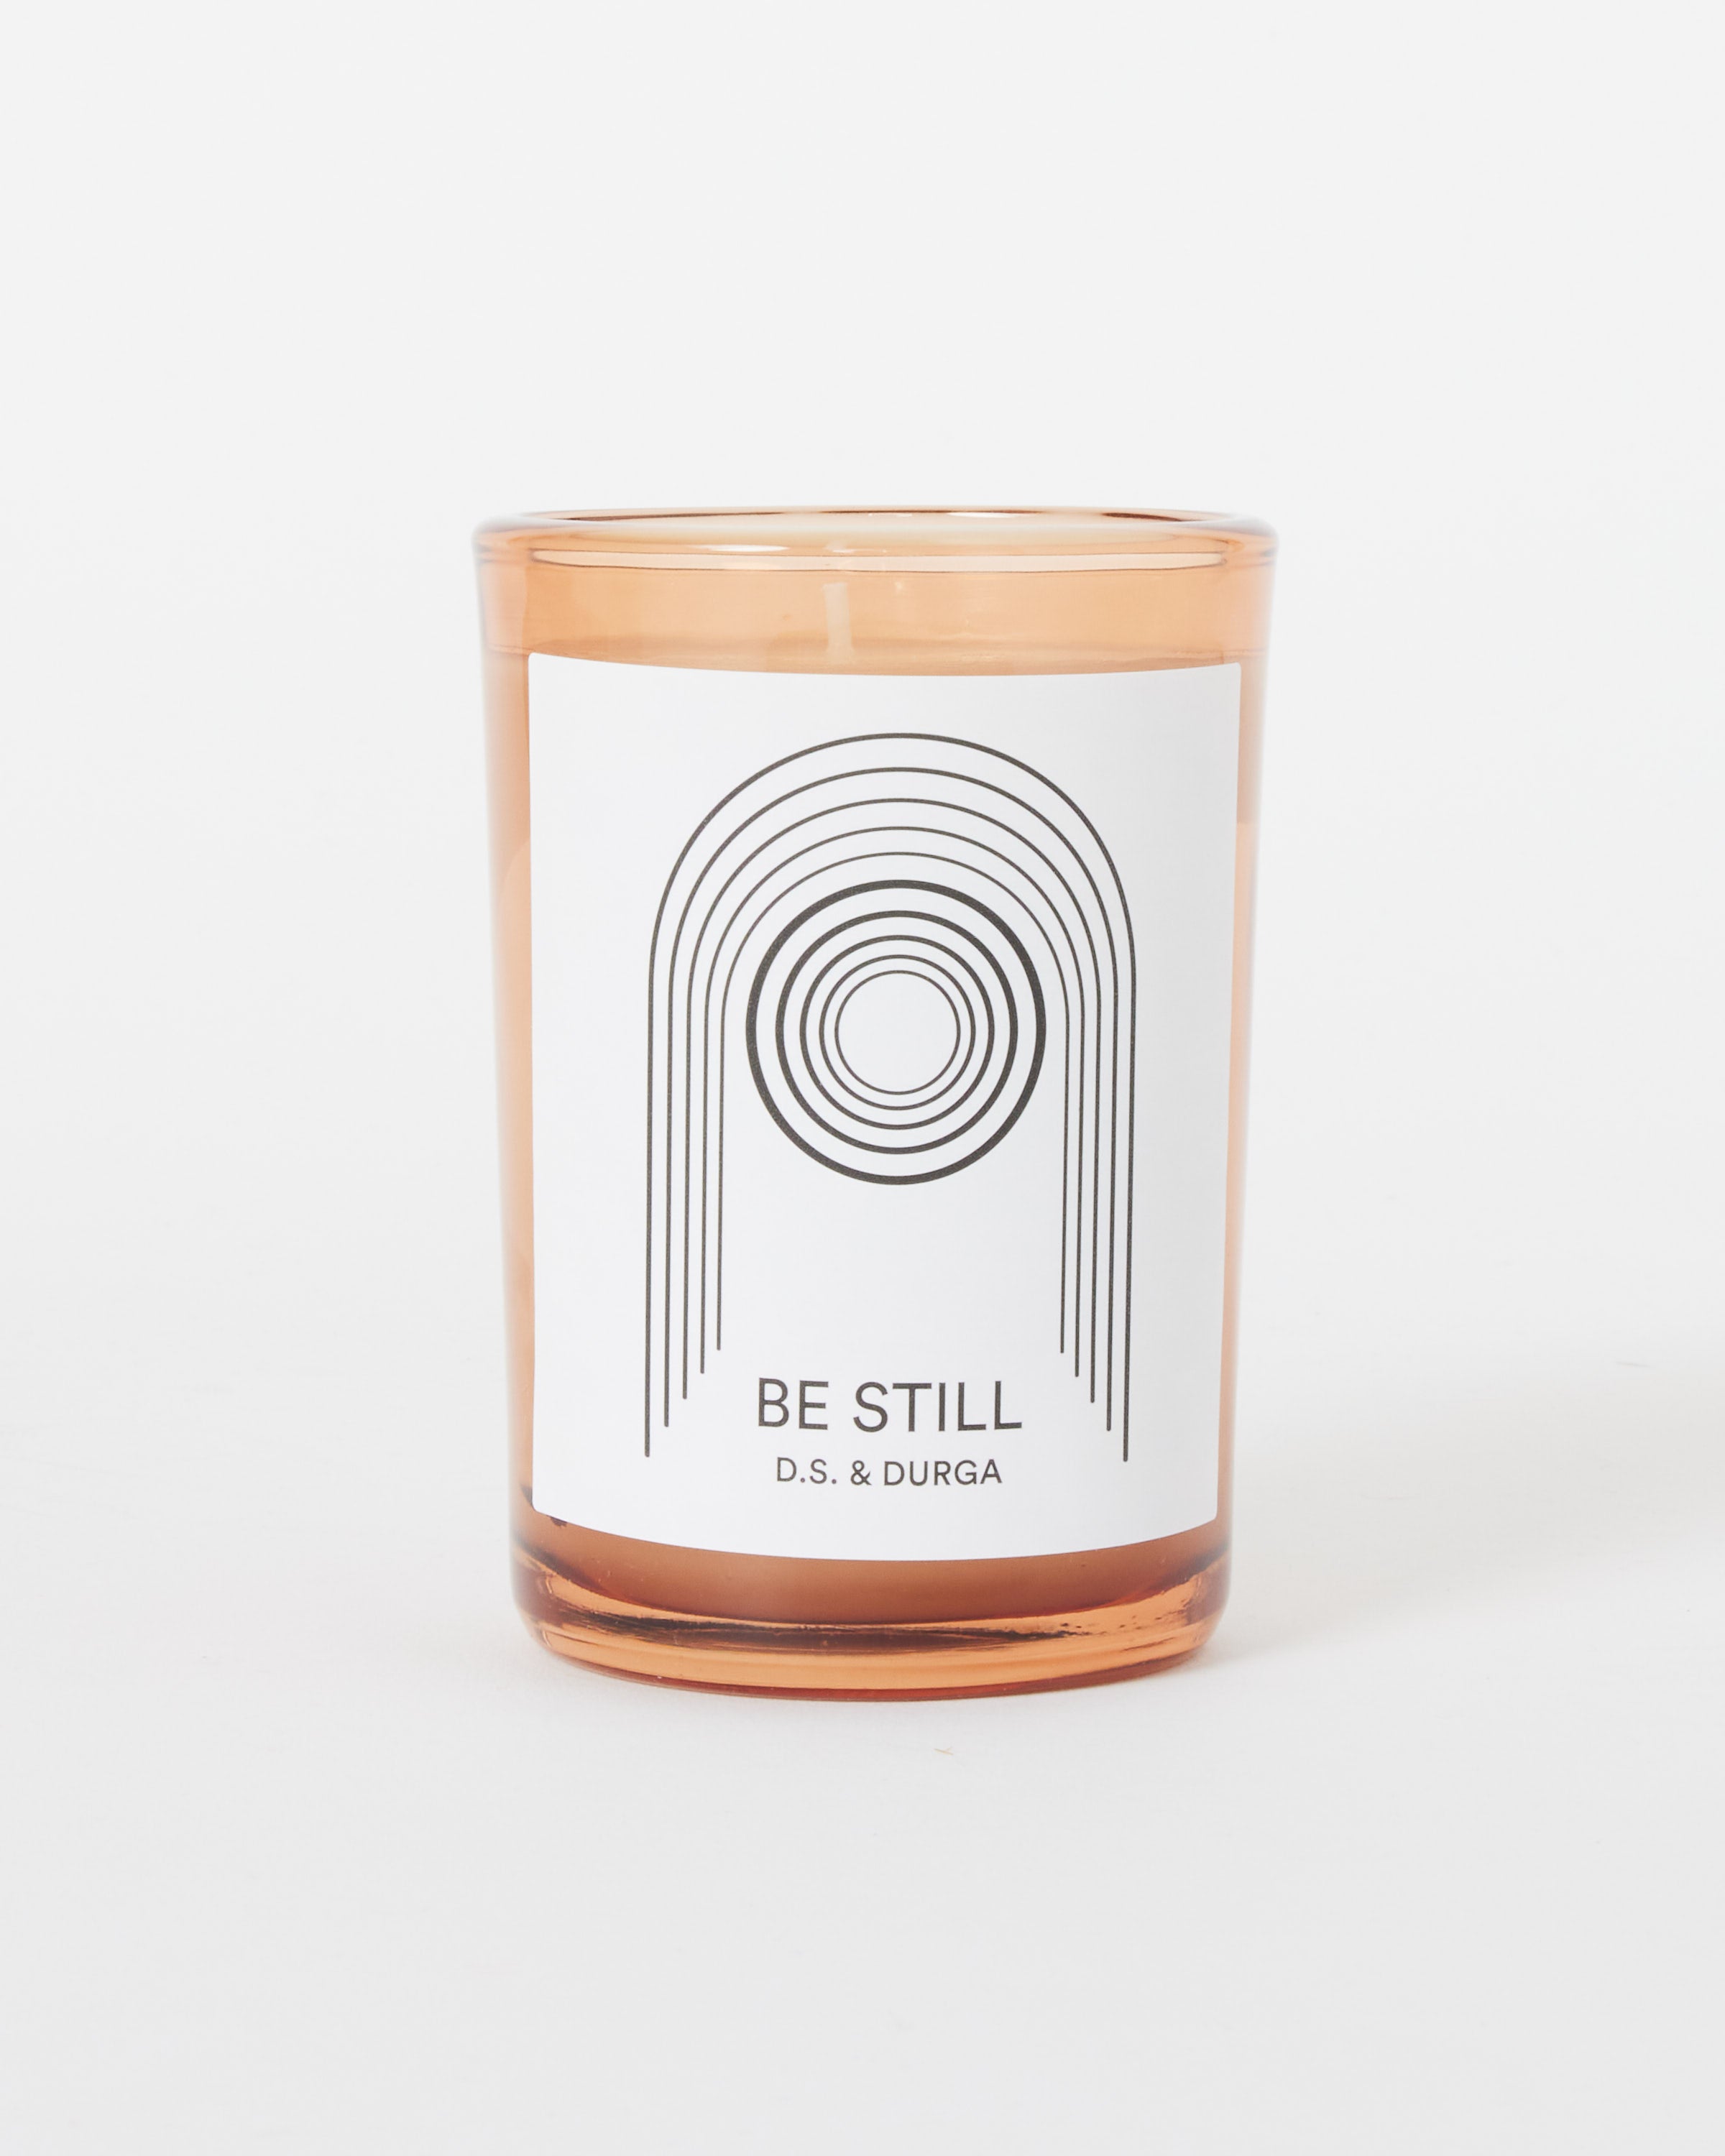 Candle in Be Still